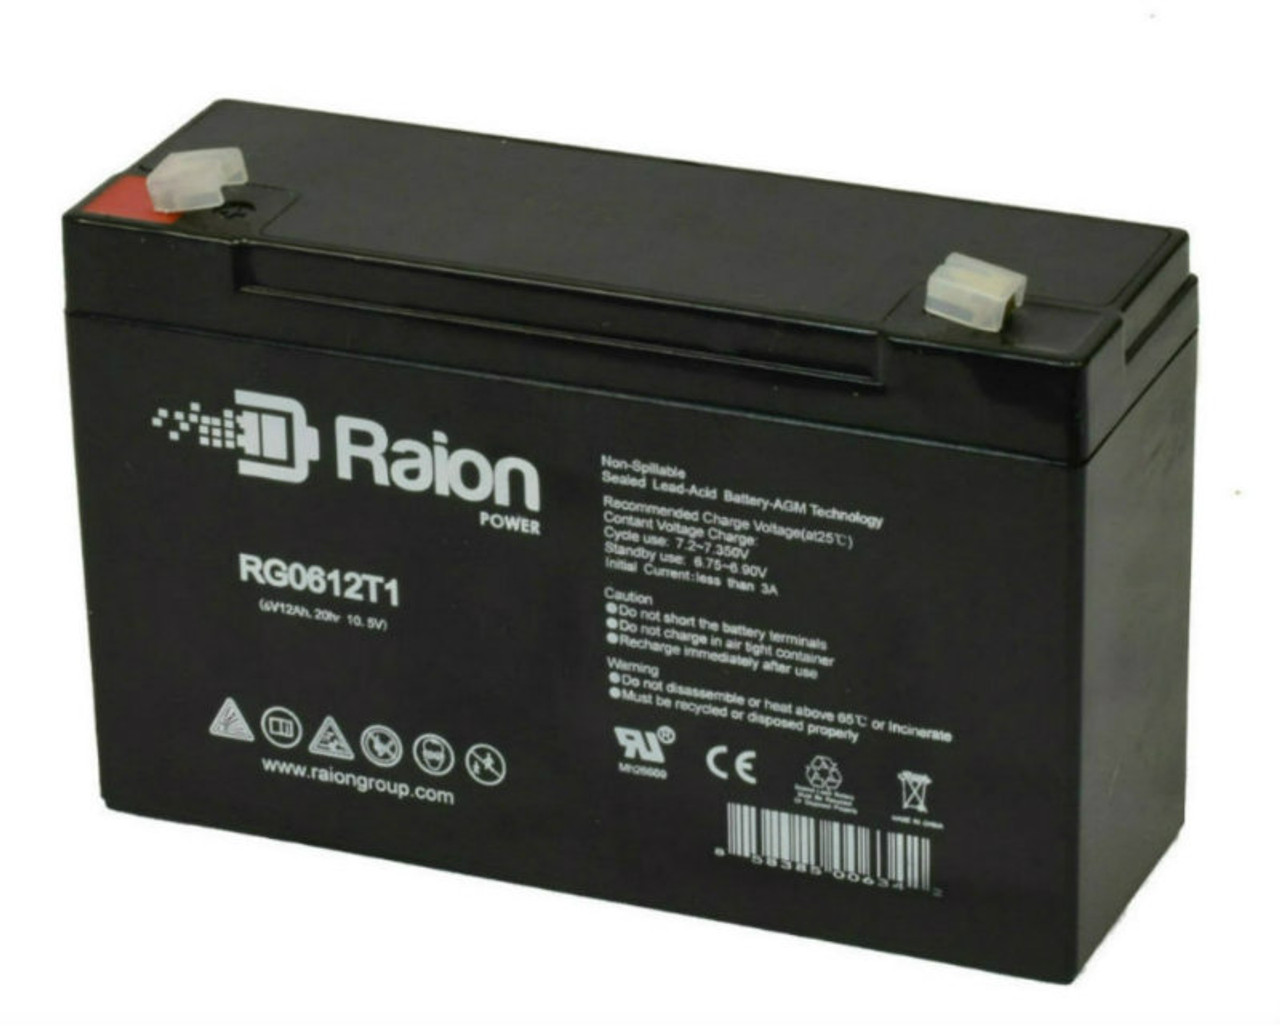 Raion Power RG06120T1 Replacement 6V 12Ah Emergency Light Battery for Lithonia ELB0610